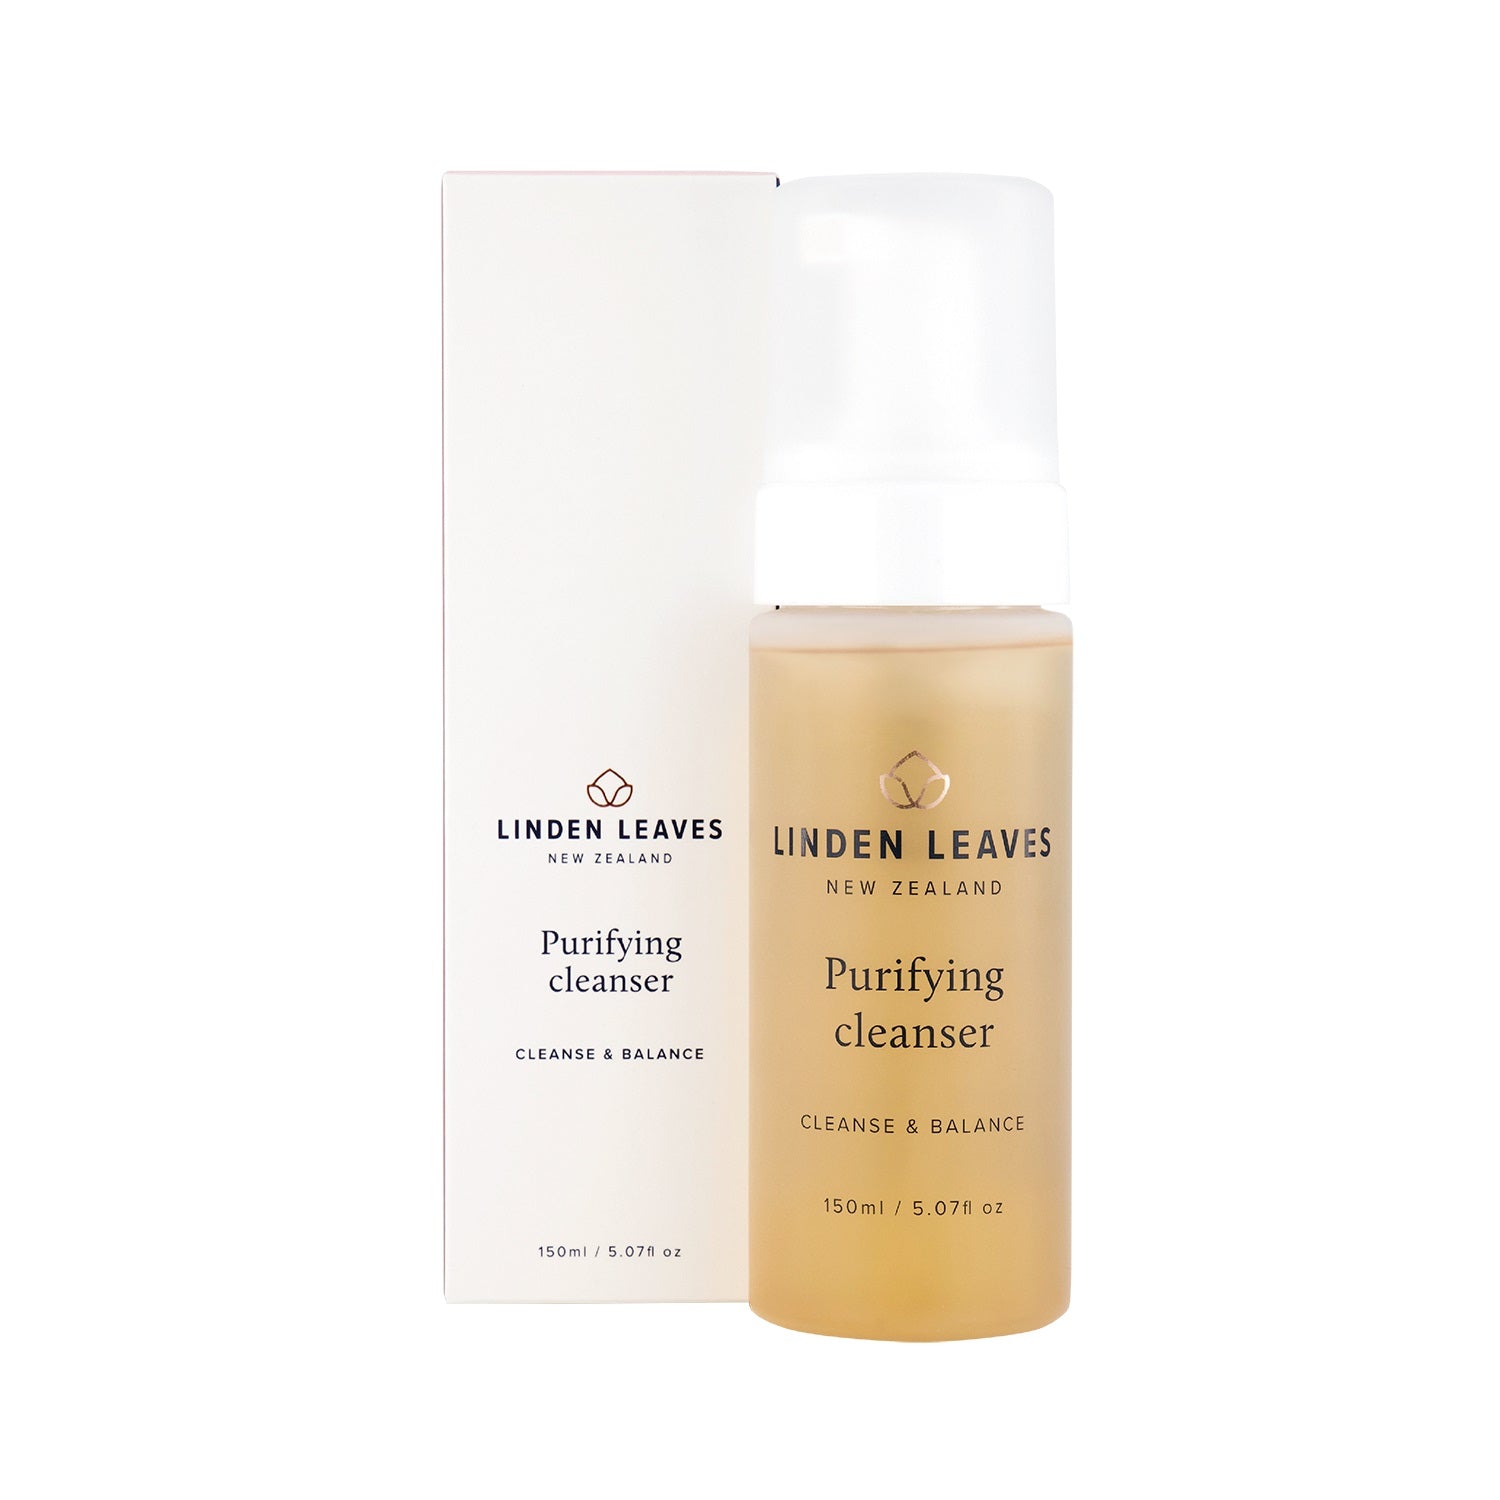 Linden Leaves Purifying Cleanser 150ml.